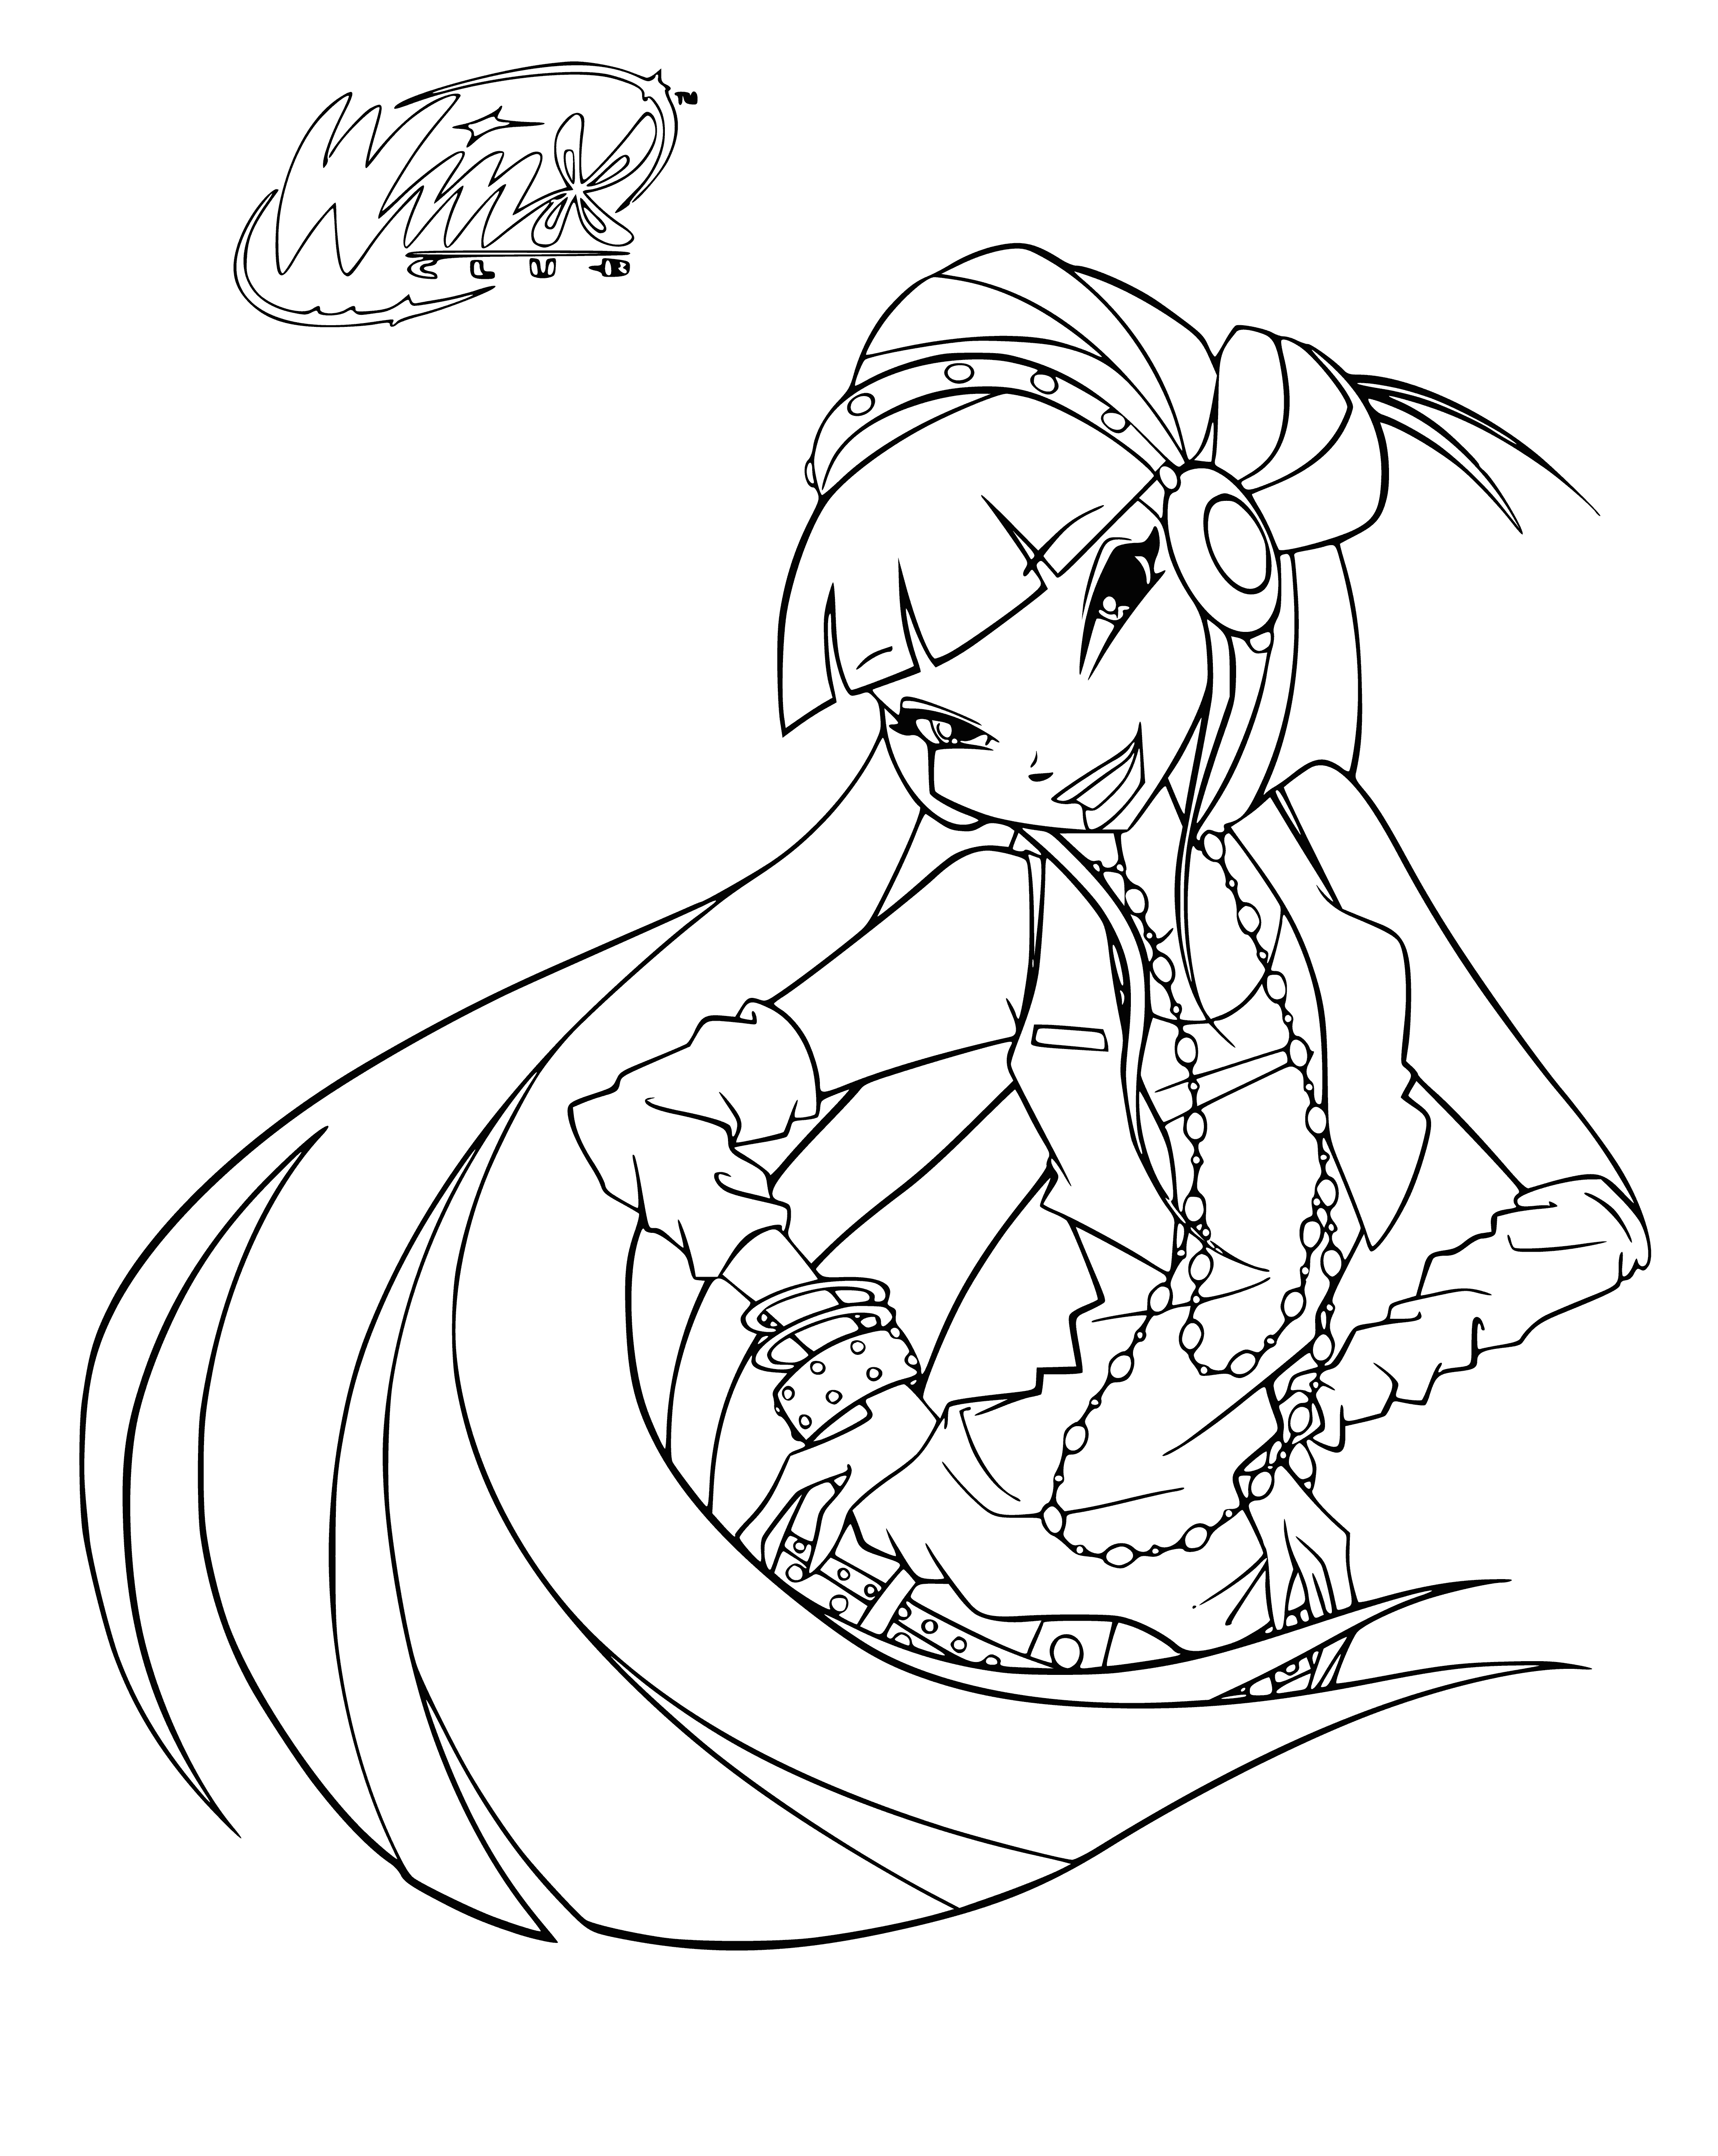 coloring page: The Muse is a beautiful Winx surrounded by books, with a tranquil look and a white dress, blue sash and golden hair with a blue flower.